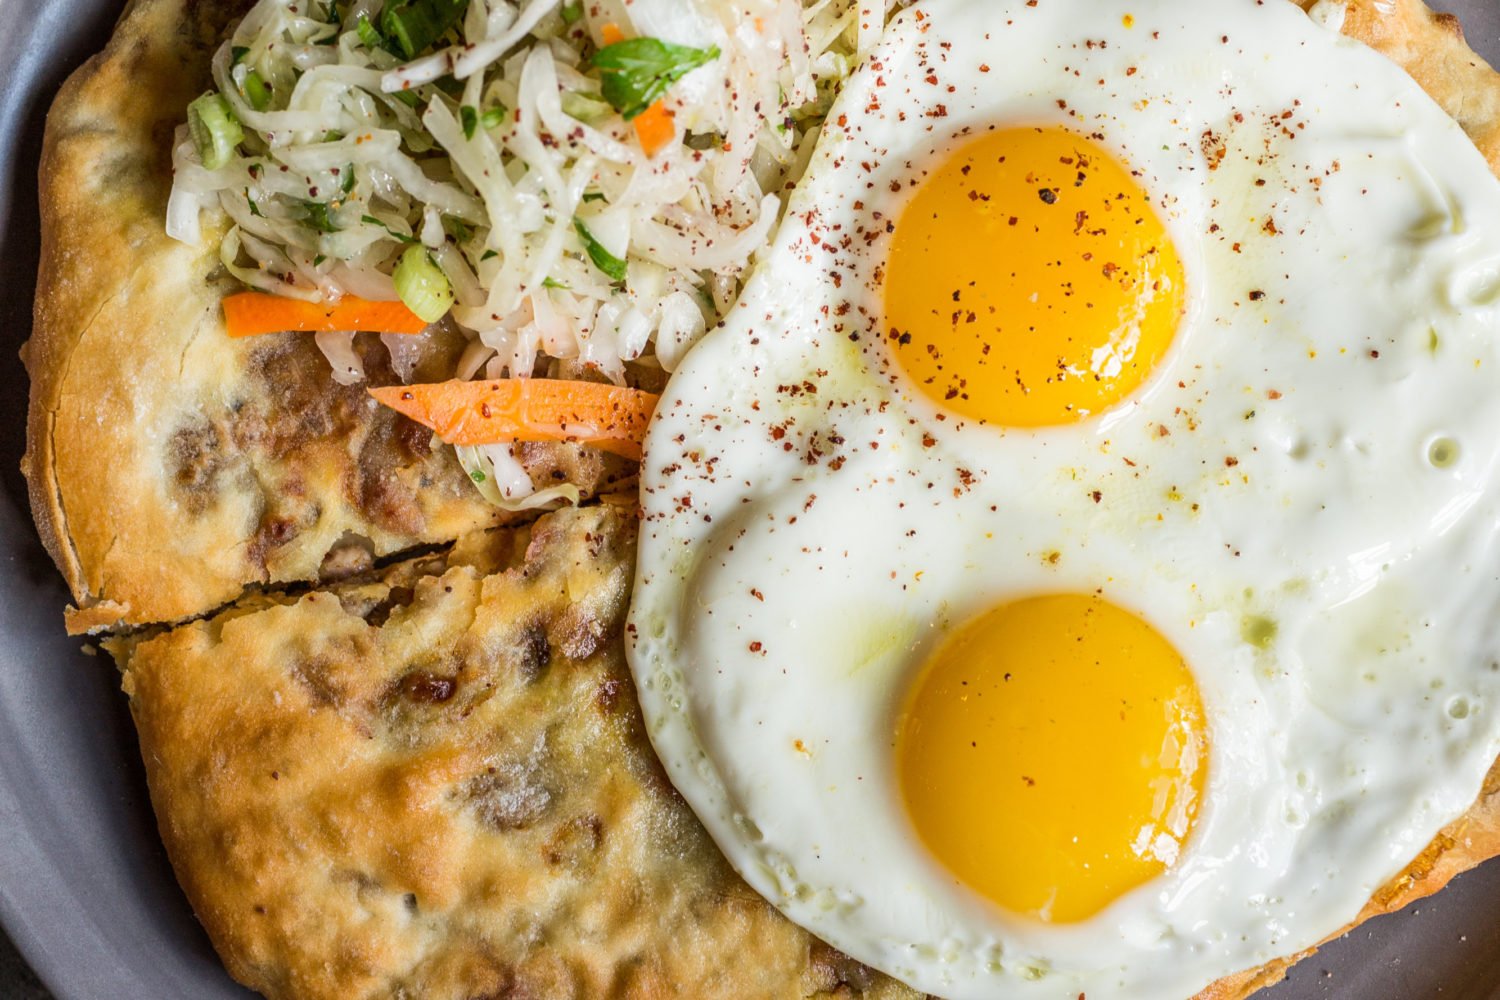 Potato-and-cheese-stuffed khabizgina is topped with an egg at Supra. Photo courtesy of Supra.